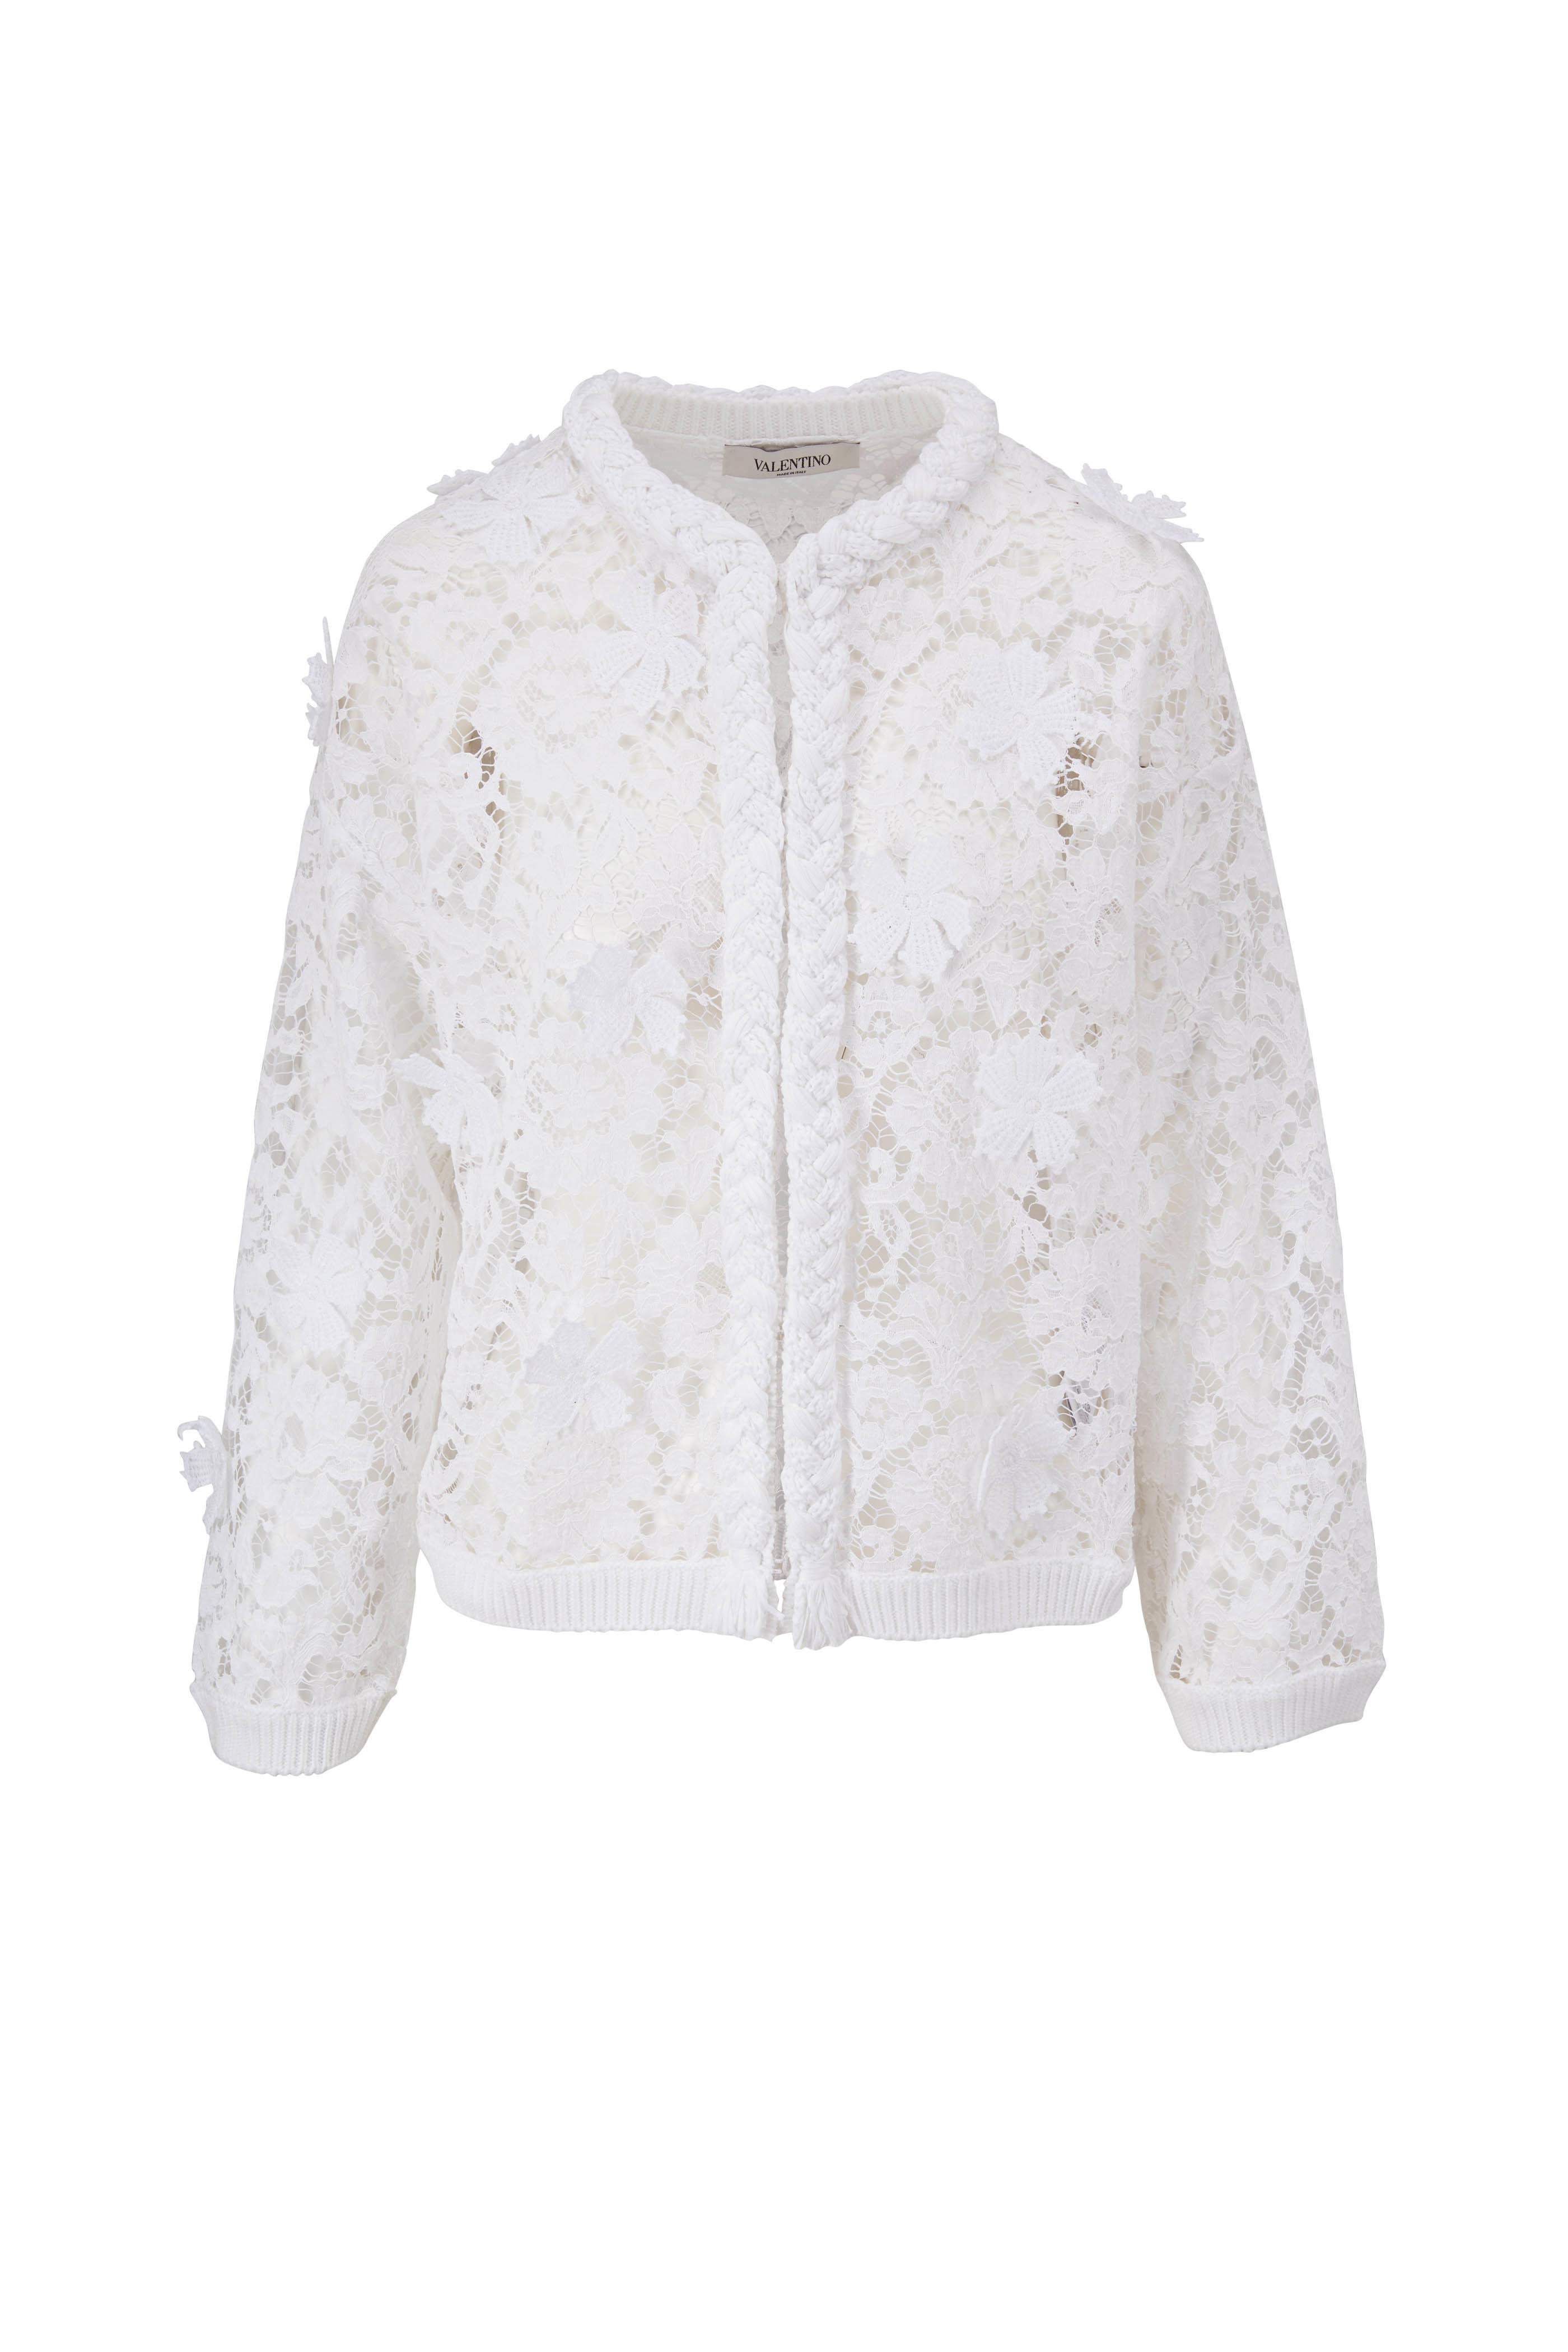 Valentino - White Floral Lace Bomber Jacket | Mitchell Stores